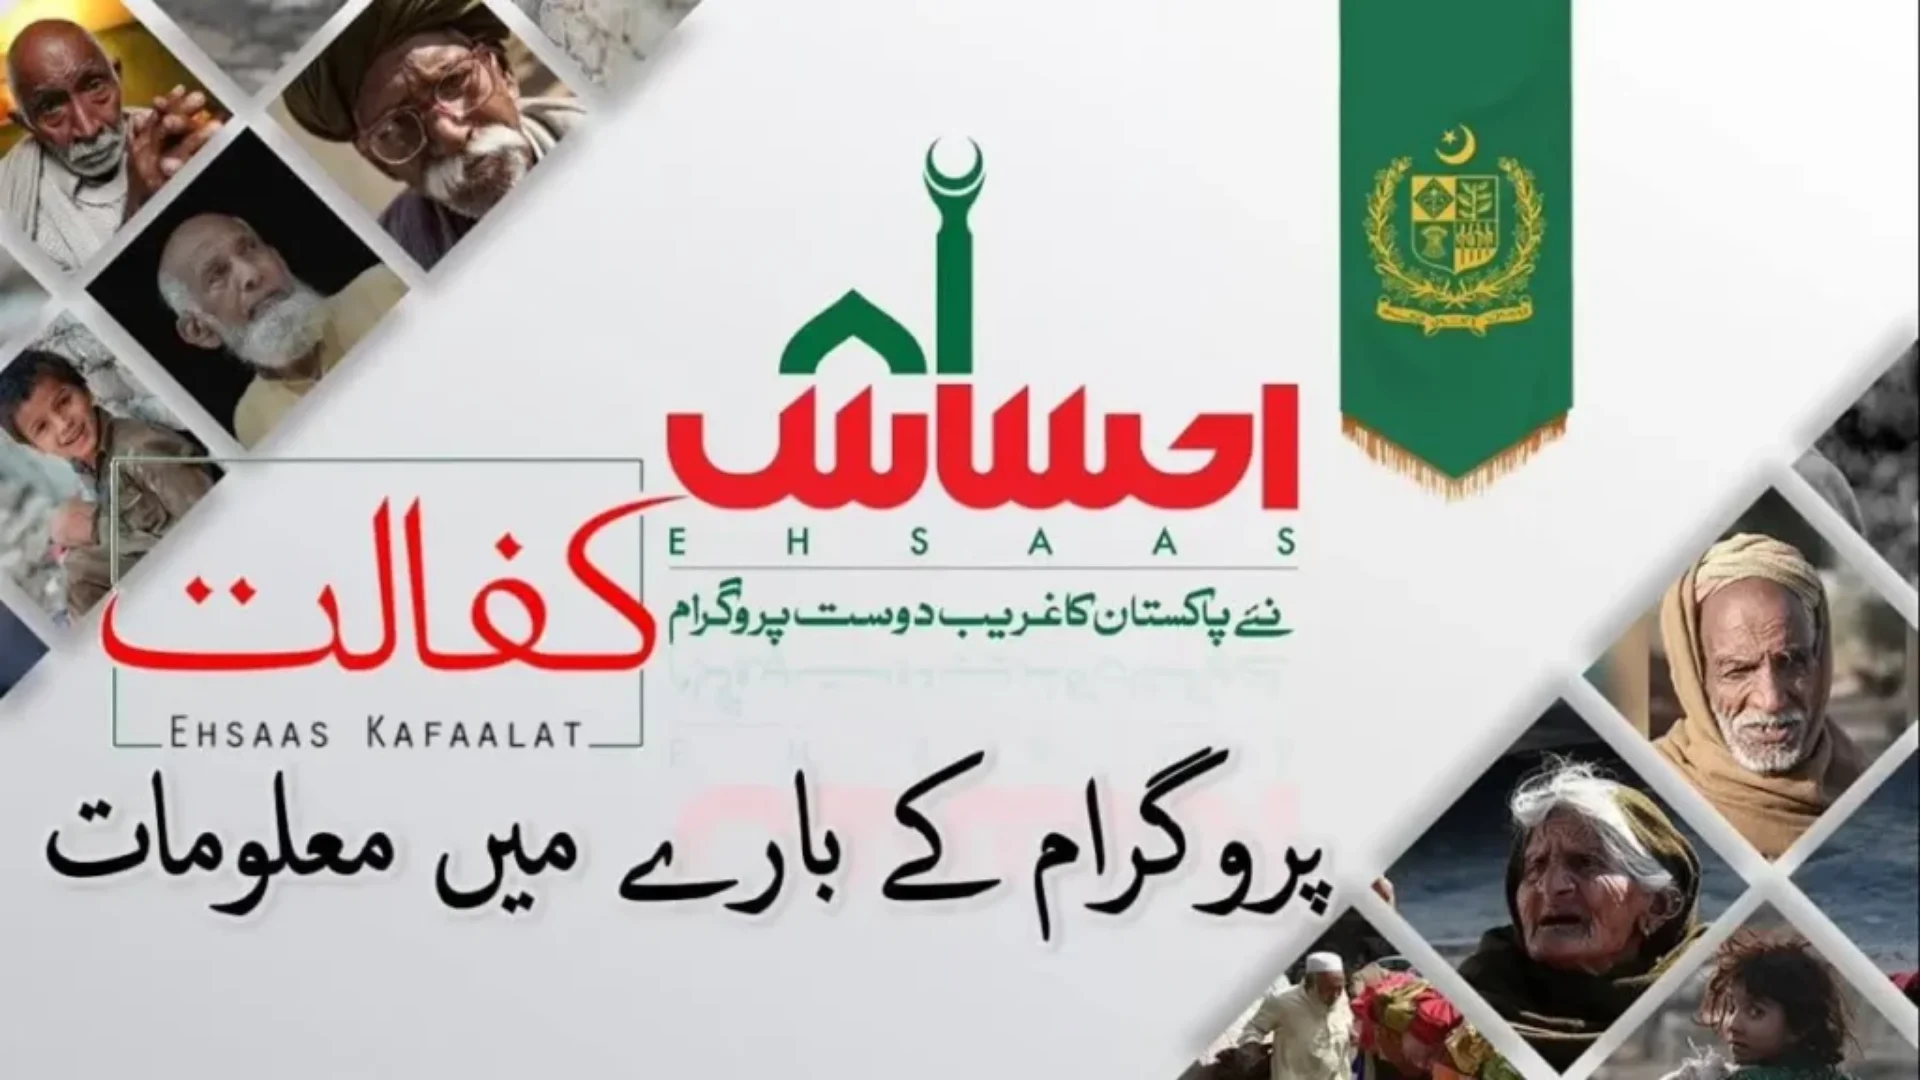 Procedure to be followed to become a beneficiary of Ehsaas Kafalat program